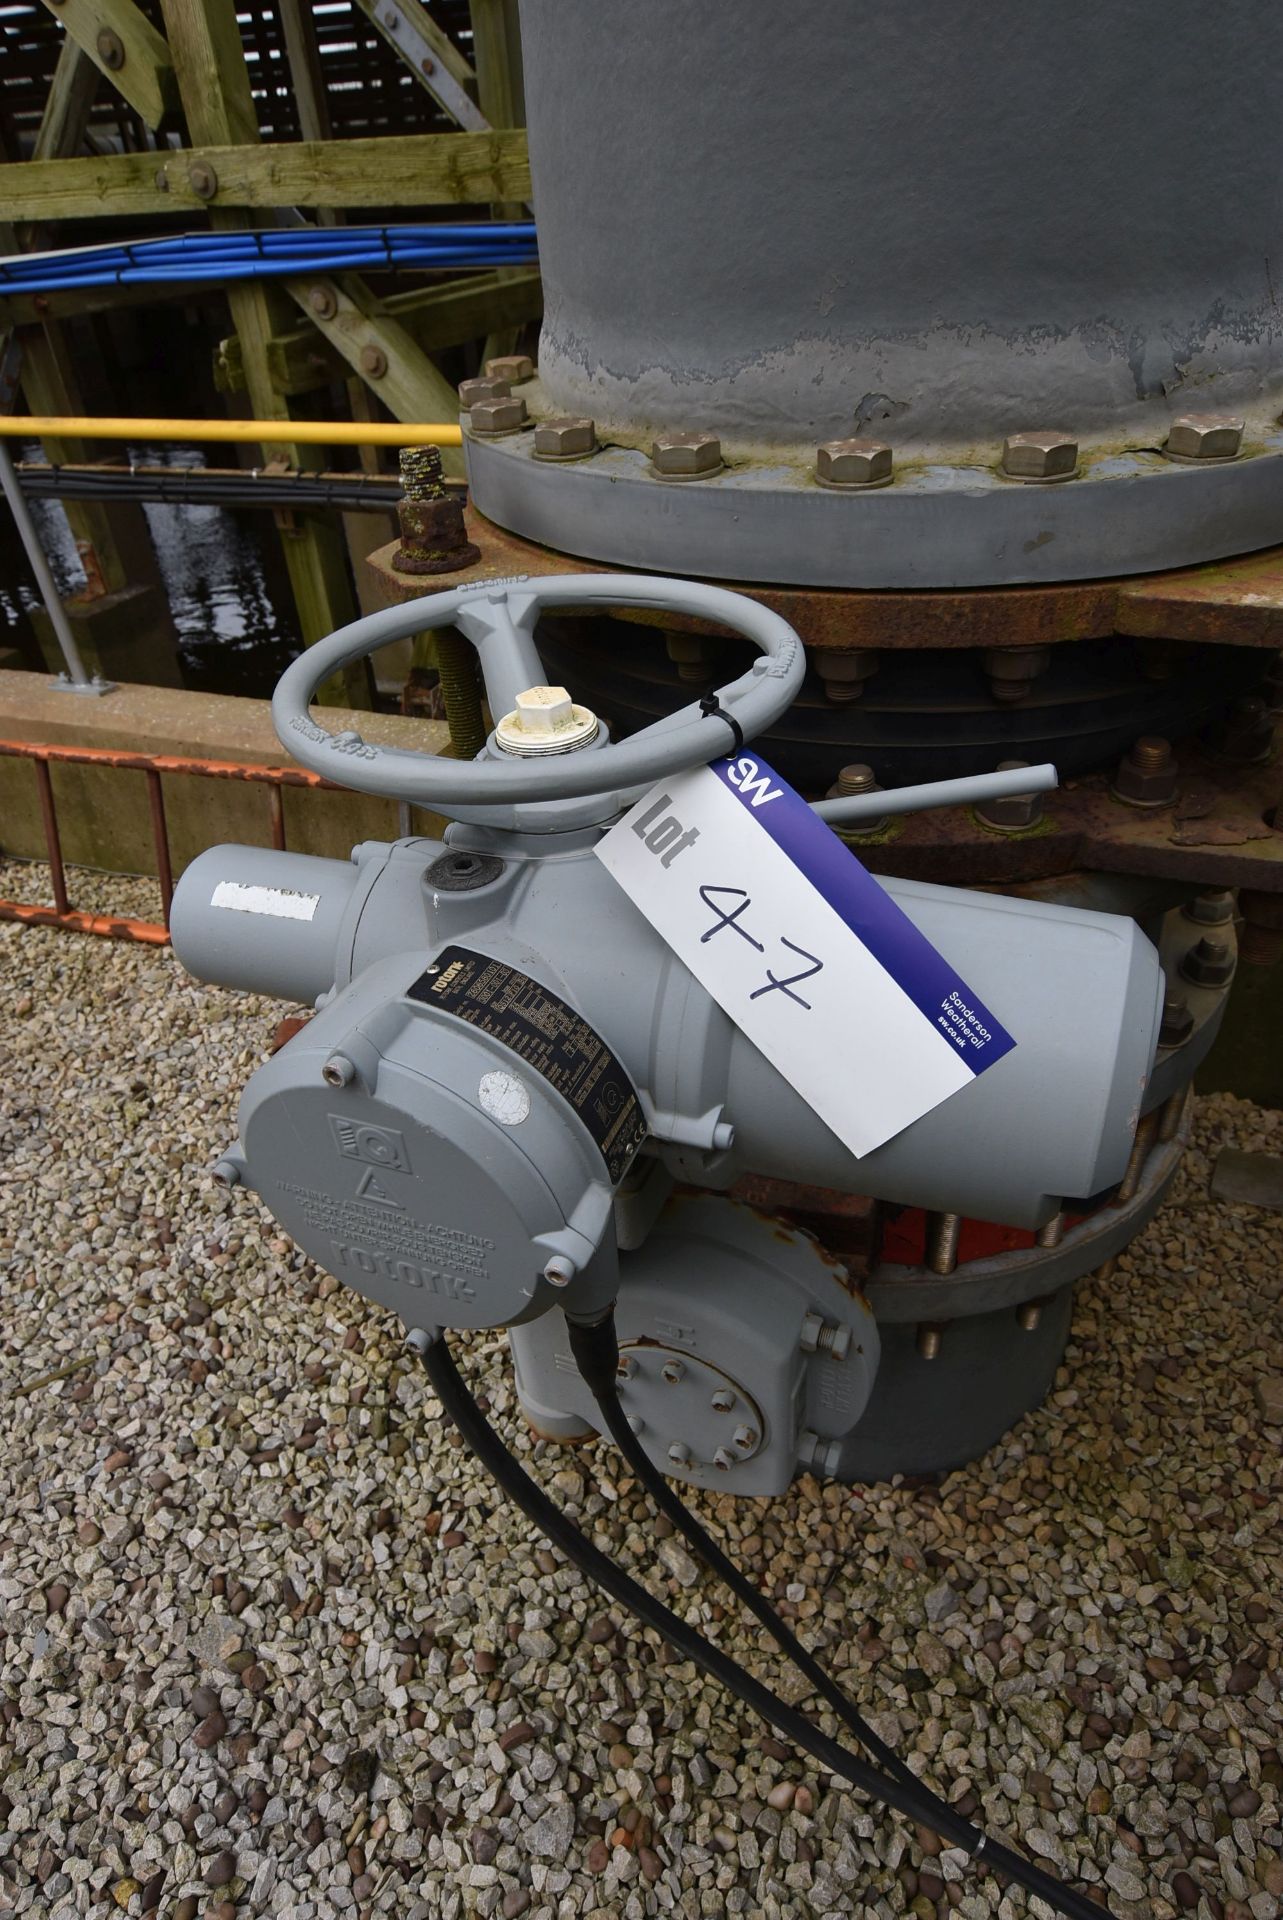 Rotork IQS12 Actuator (There will be a removal/ loading charge of £50 + VAT for this lot, payable